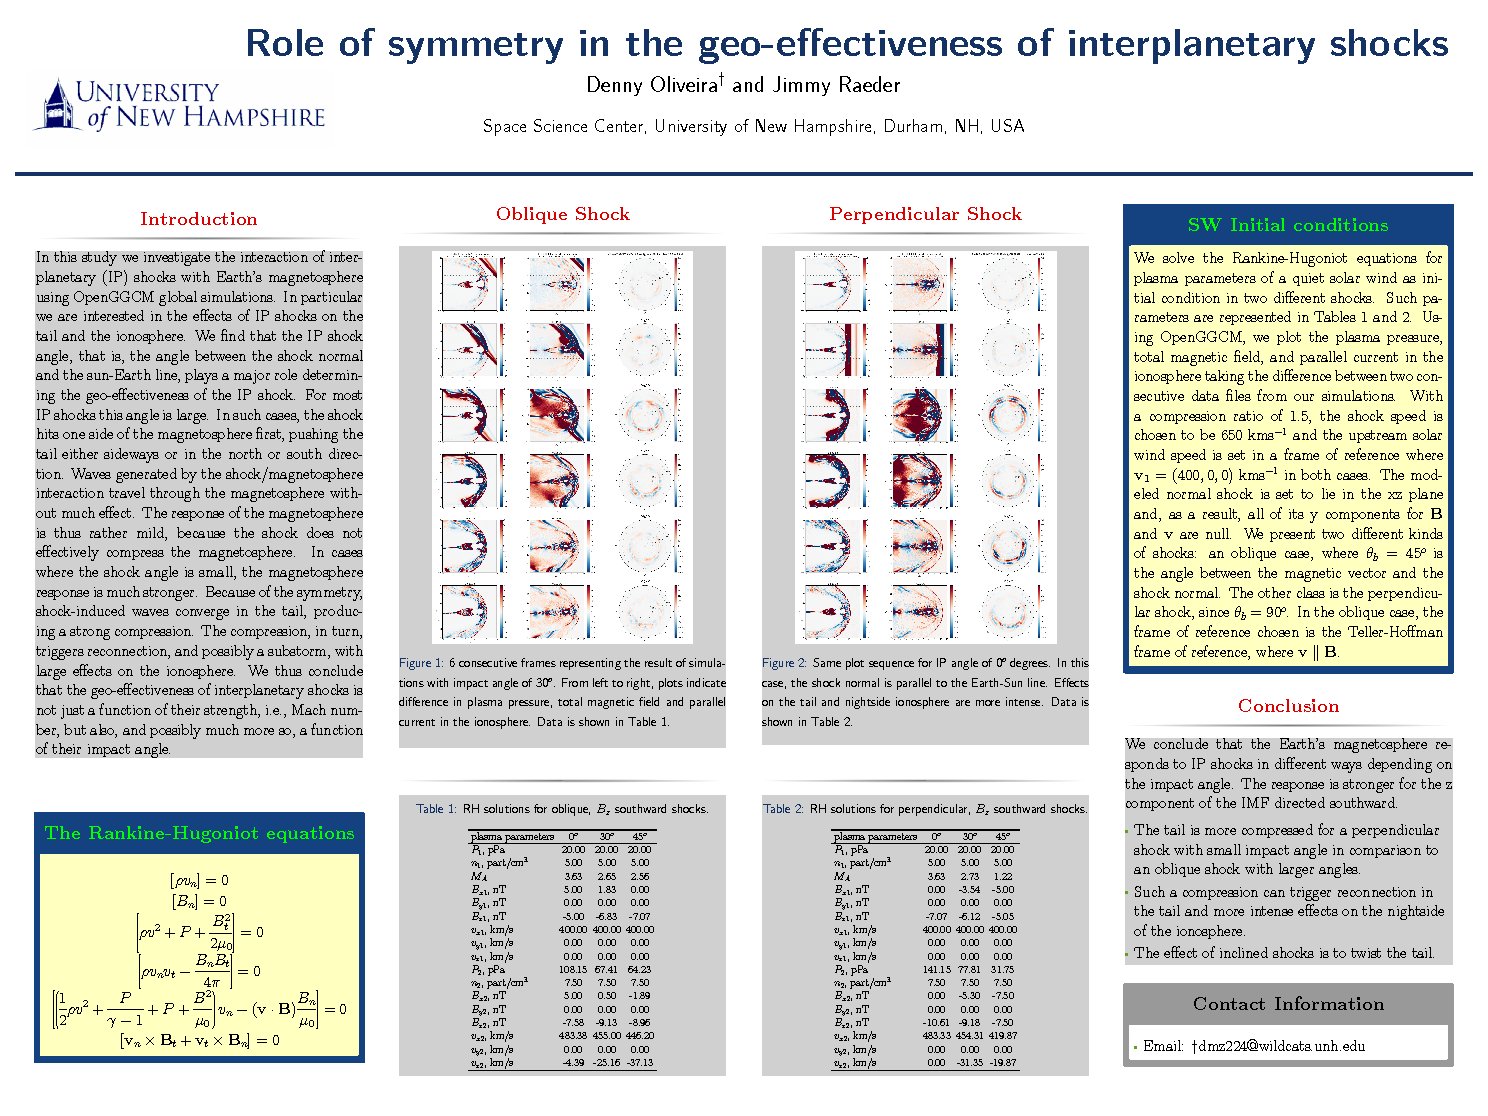 Role Of Symmetry In The Geo-Effectiveness Of Interplanetary Shocks by dmz224